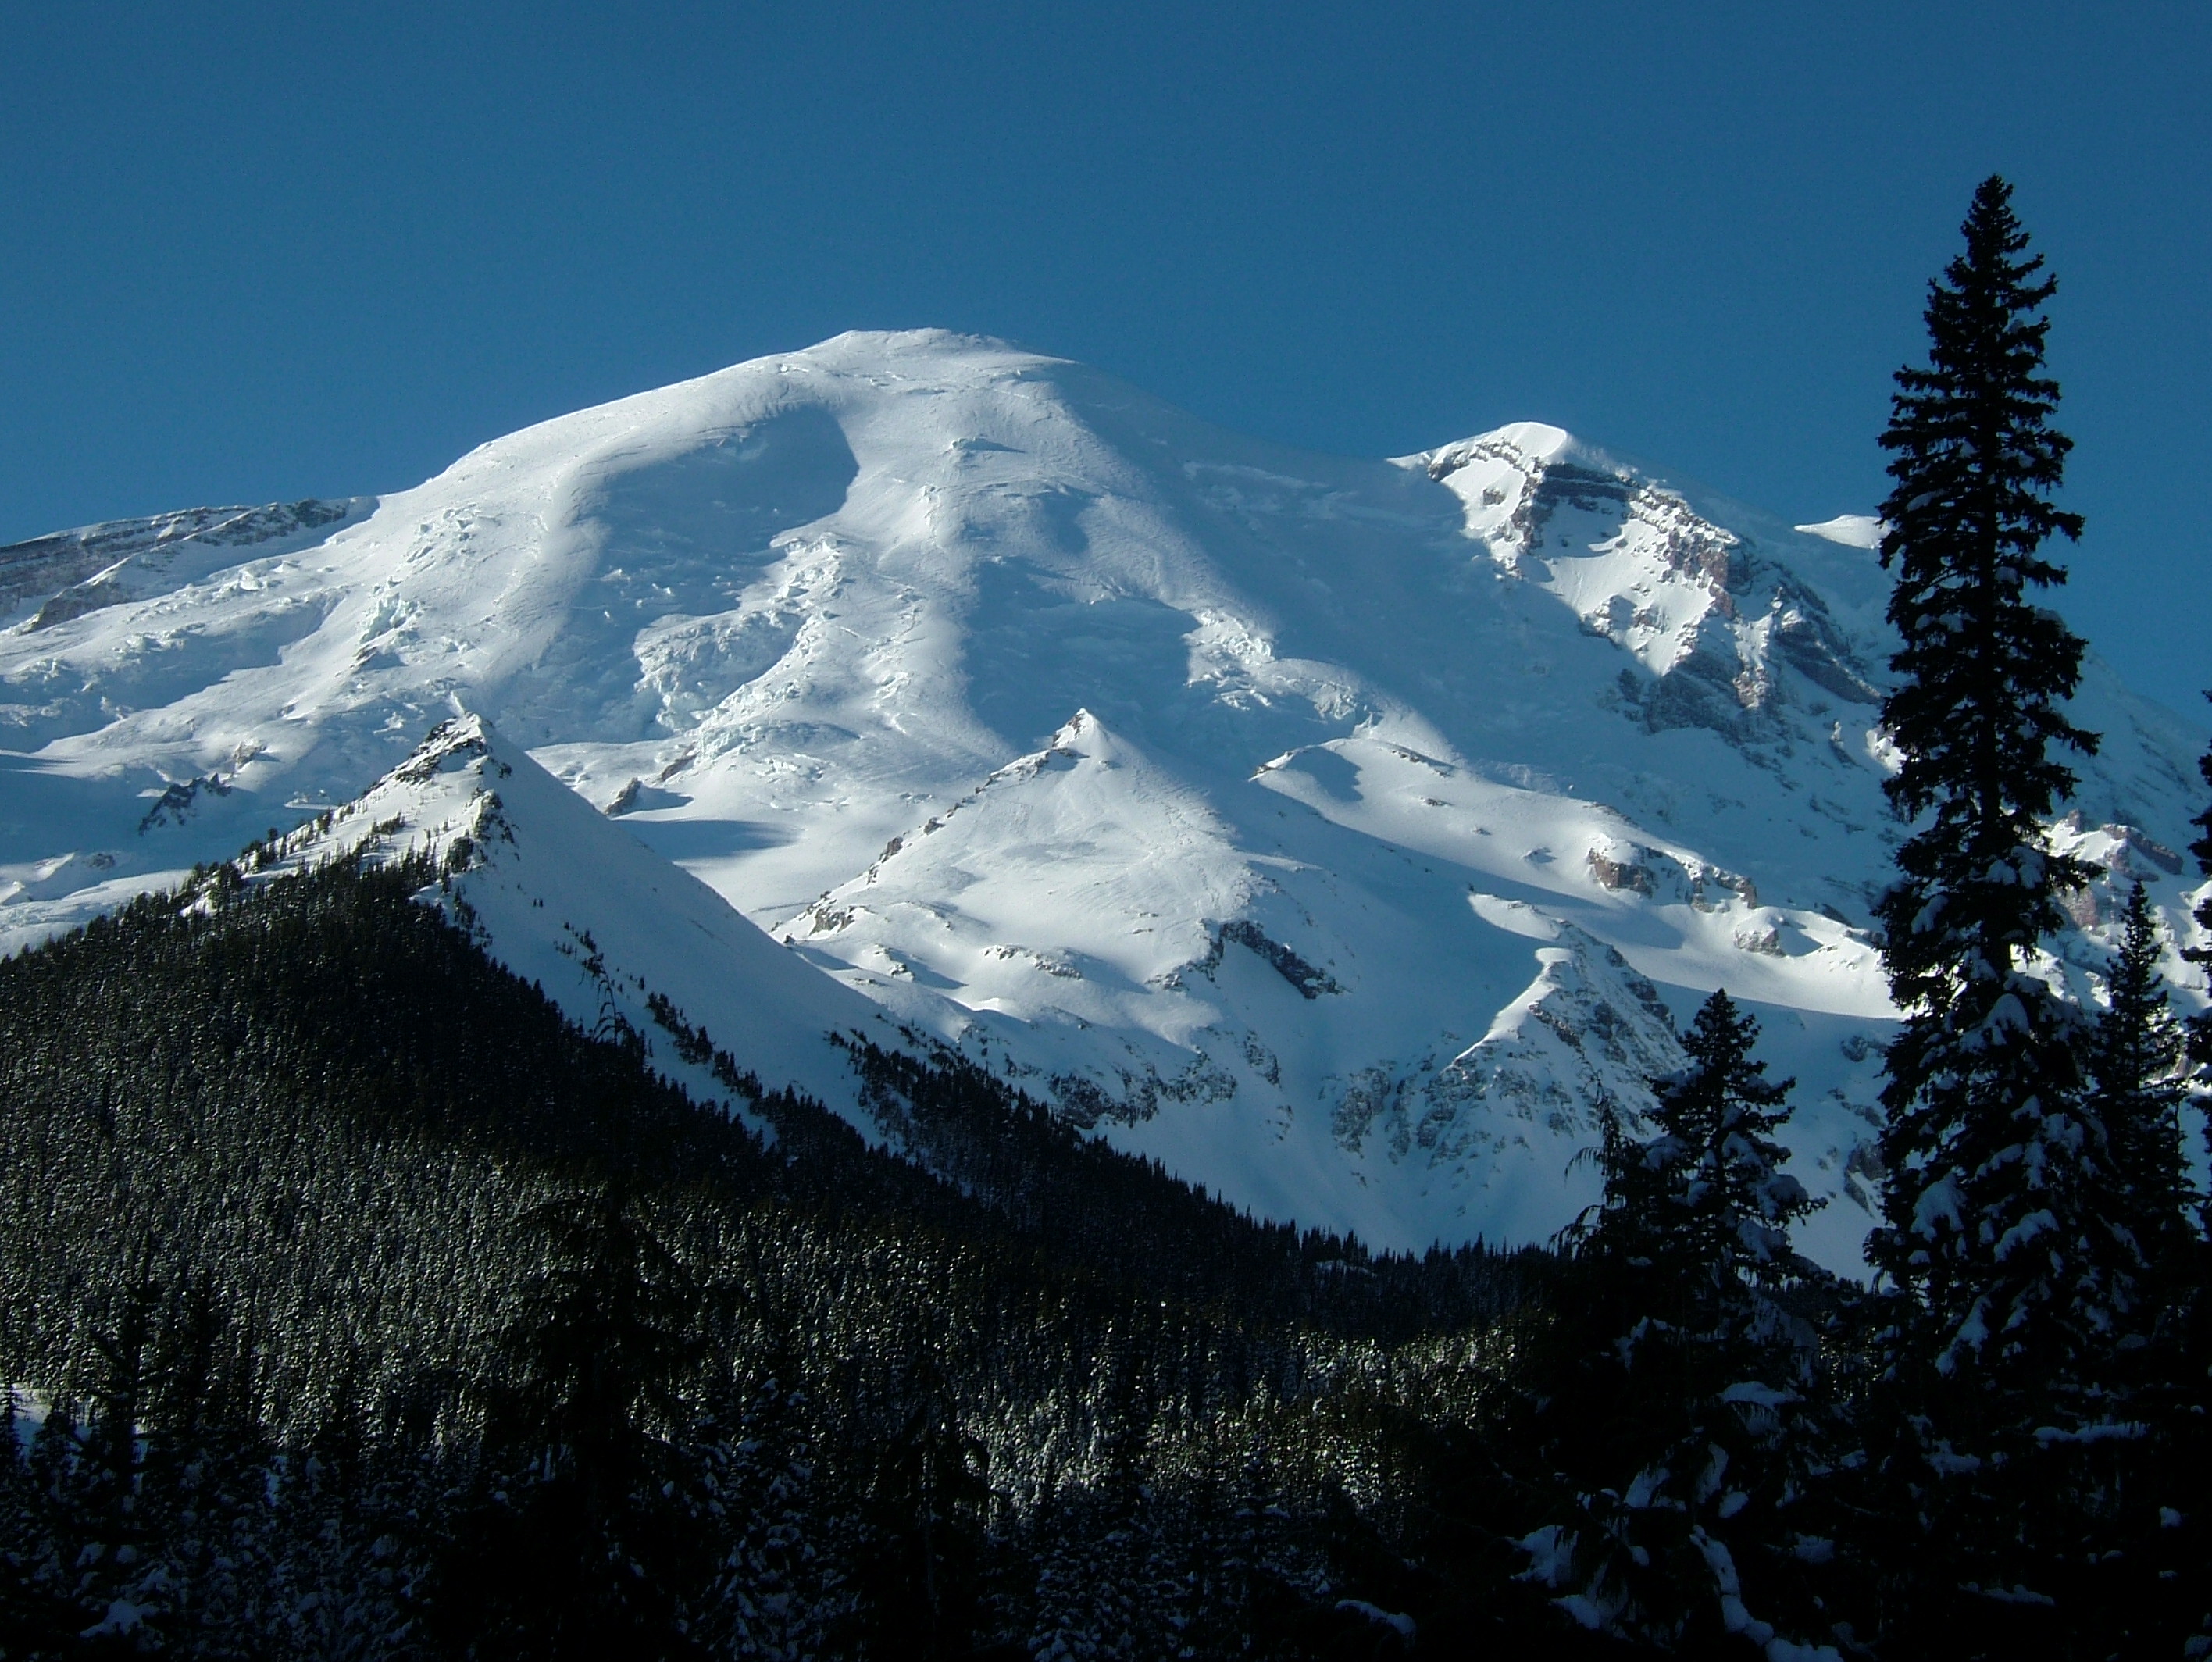 Mt. Ruth to the left and the Interglacier to the right